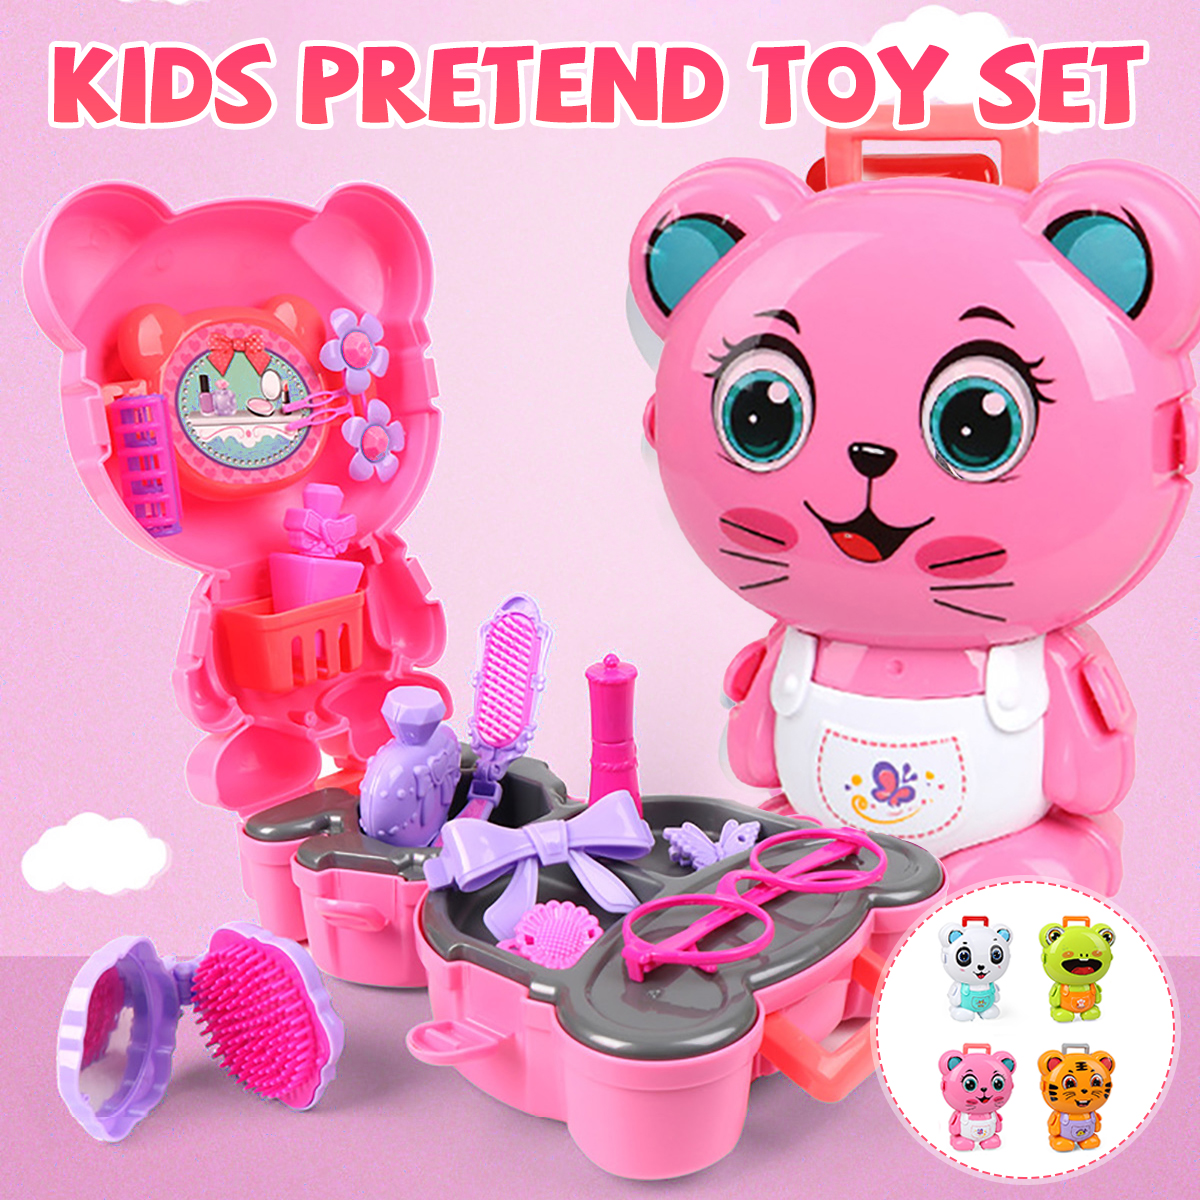 Simulation-Kids-Kitchen-Cooking-Tools-Doctors-Makeup-Playing-Education-Pretend-Toy-Set-with-Carrying-1725293-2